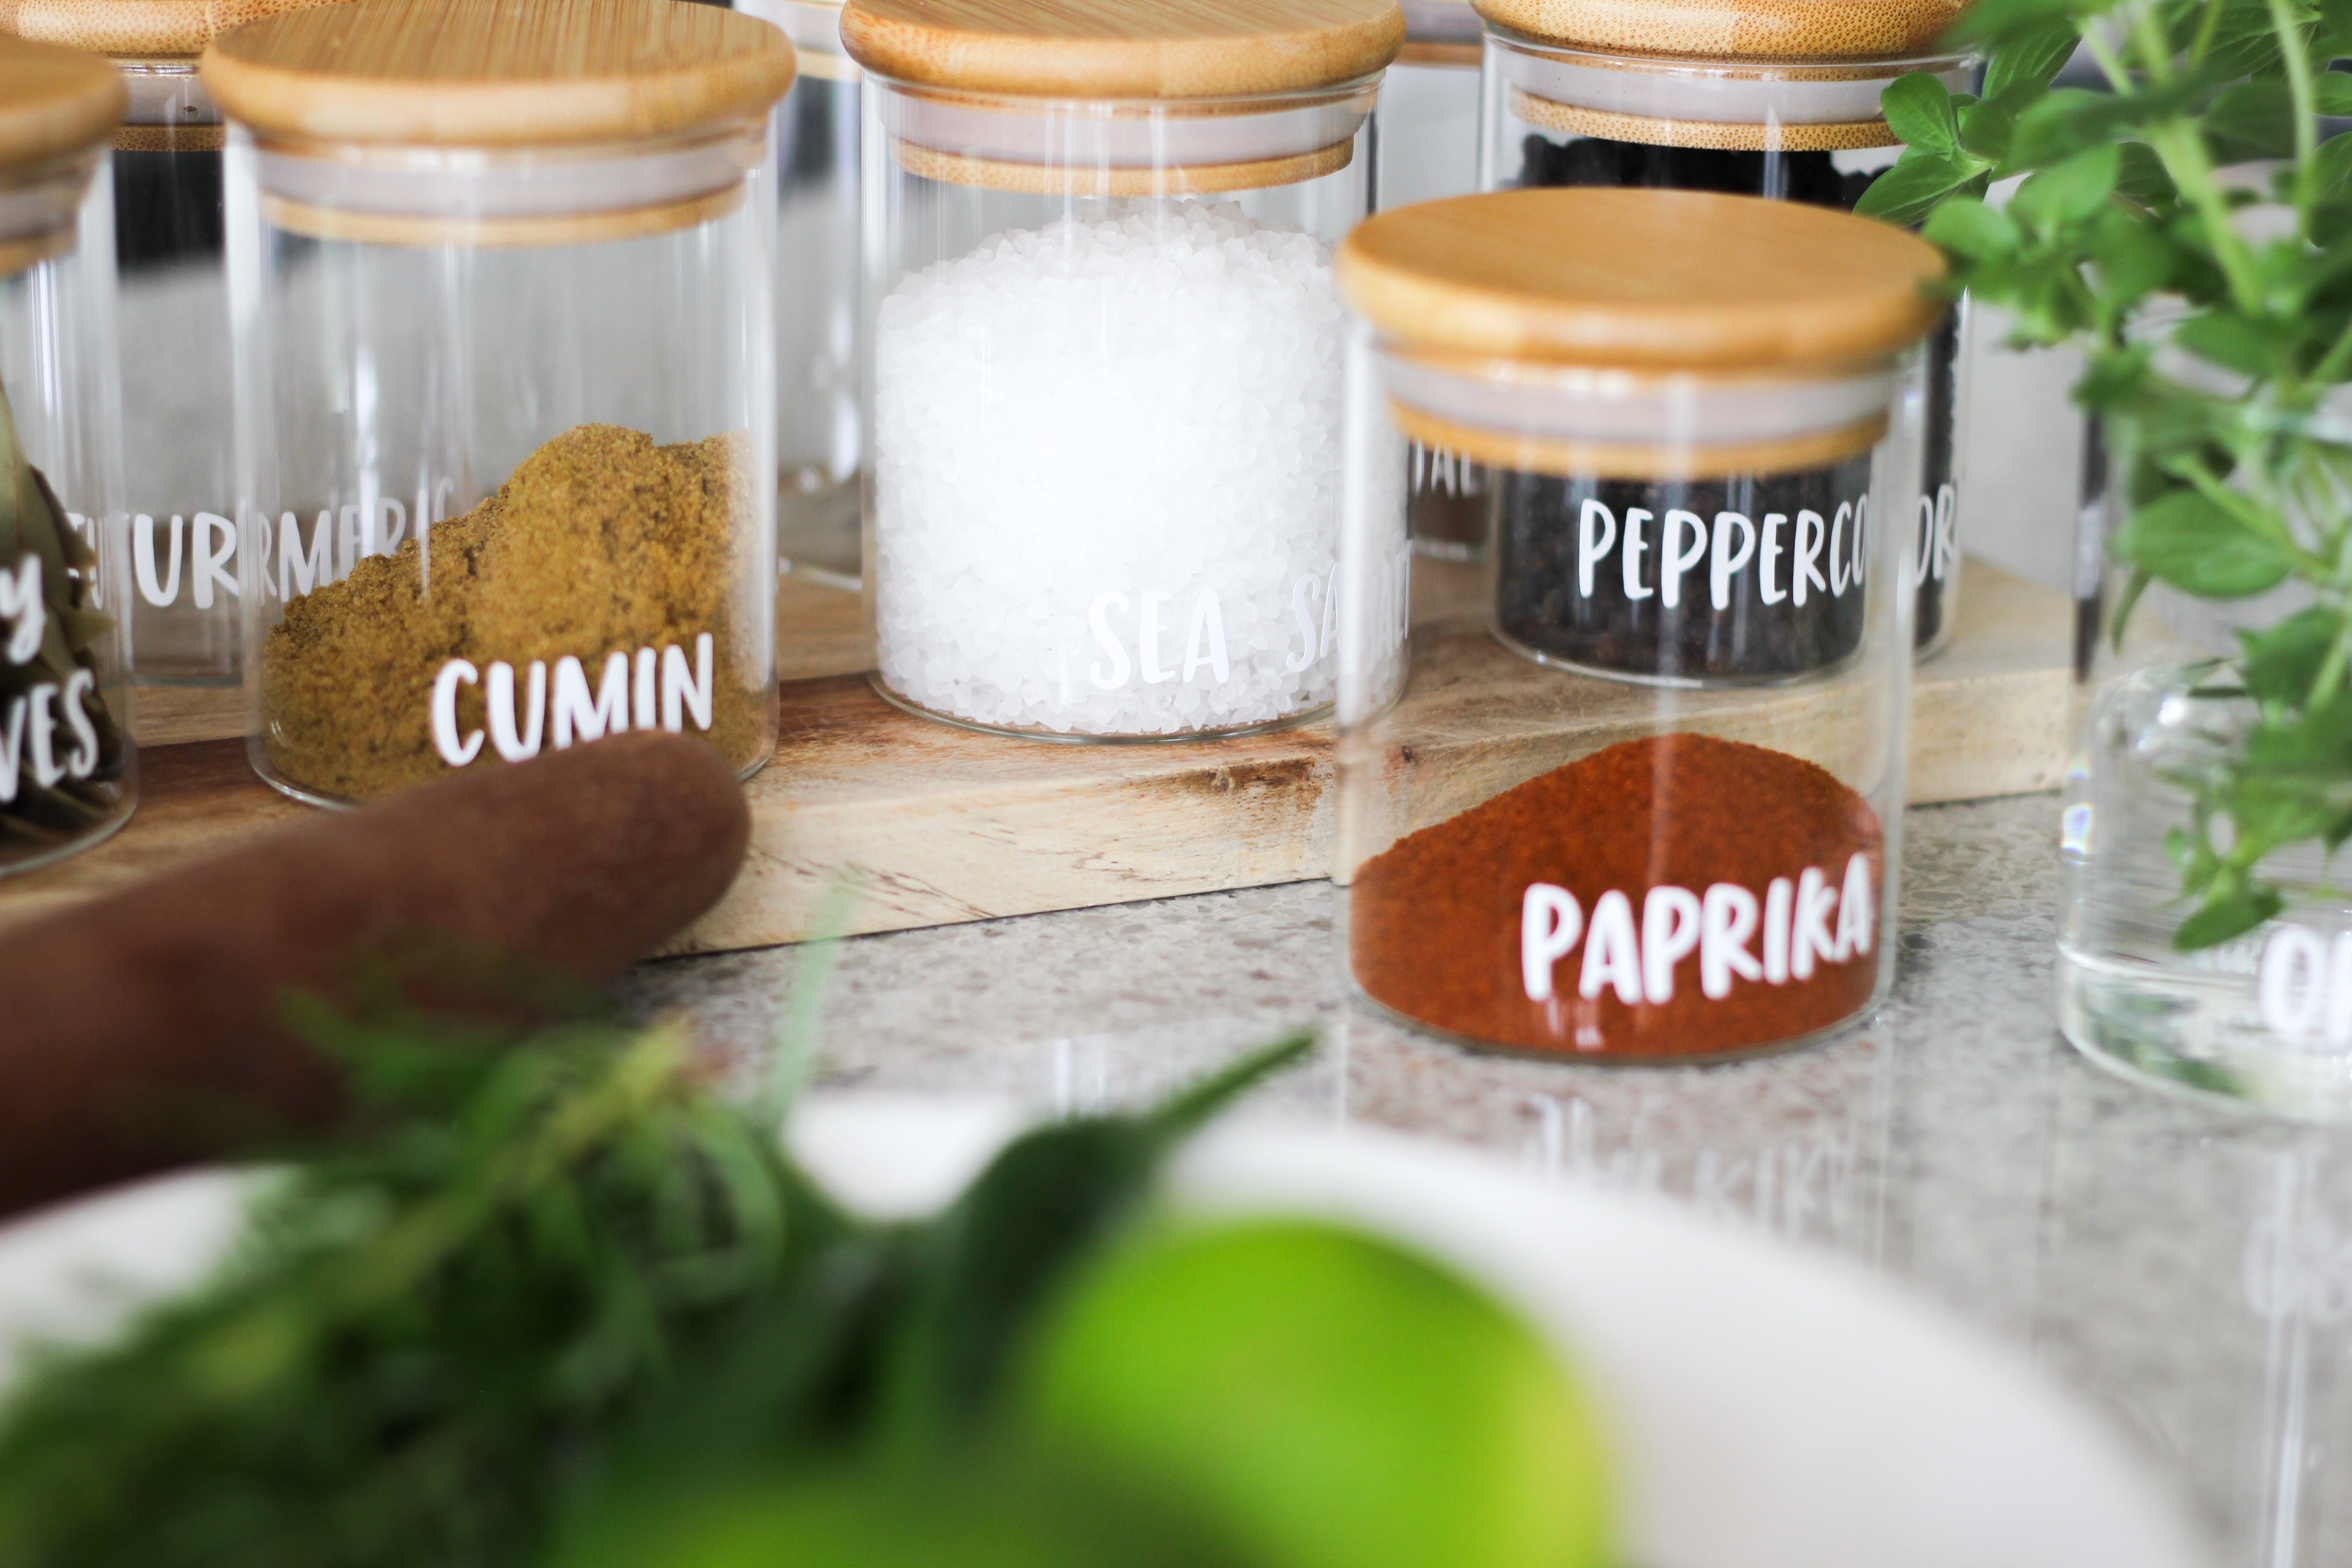 Best Spice Jars With Bamboo Lids + Labels - Caitlin Marie Design